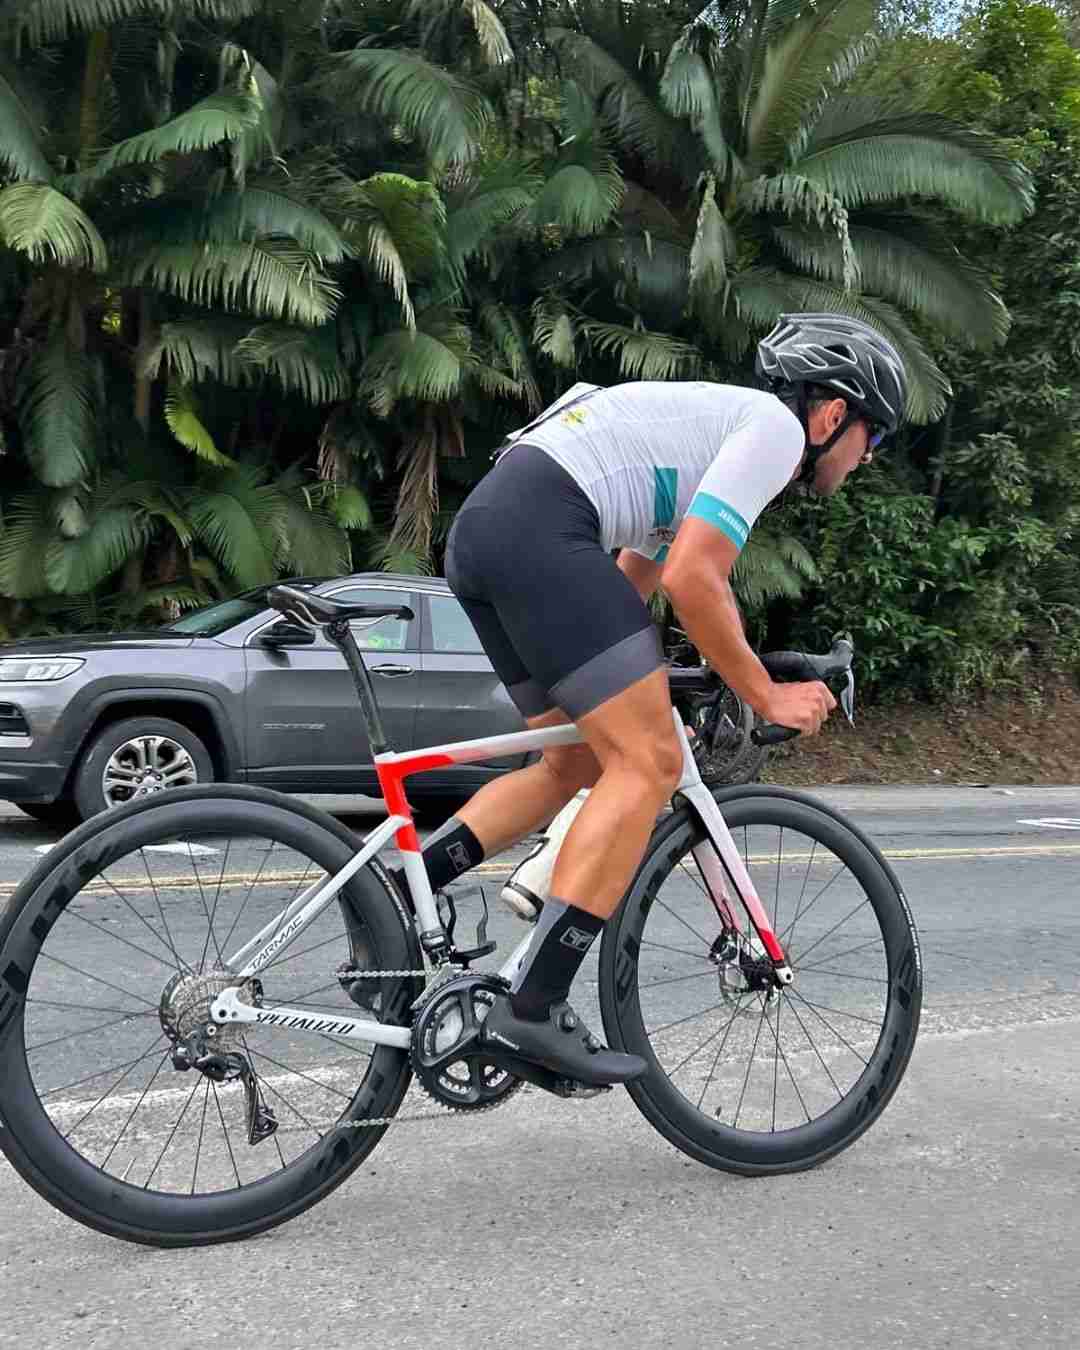 Cyclist Riding a Specialized Tarmac Bike with Elitewheels Marvel 50D Wheelsets on a Scenic Road